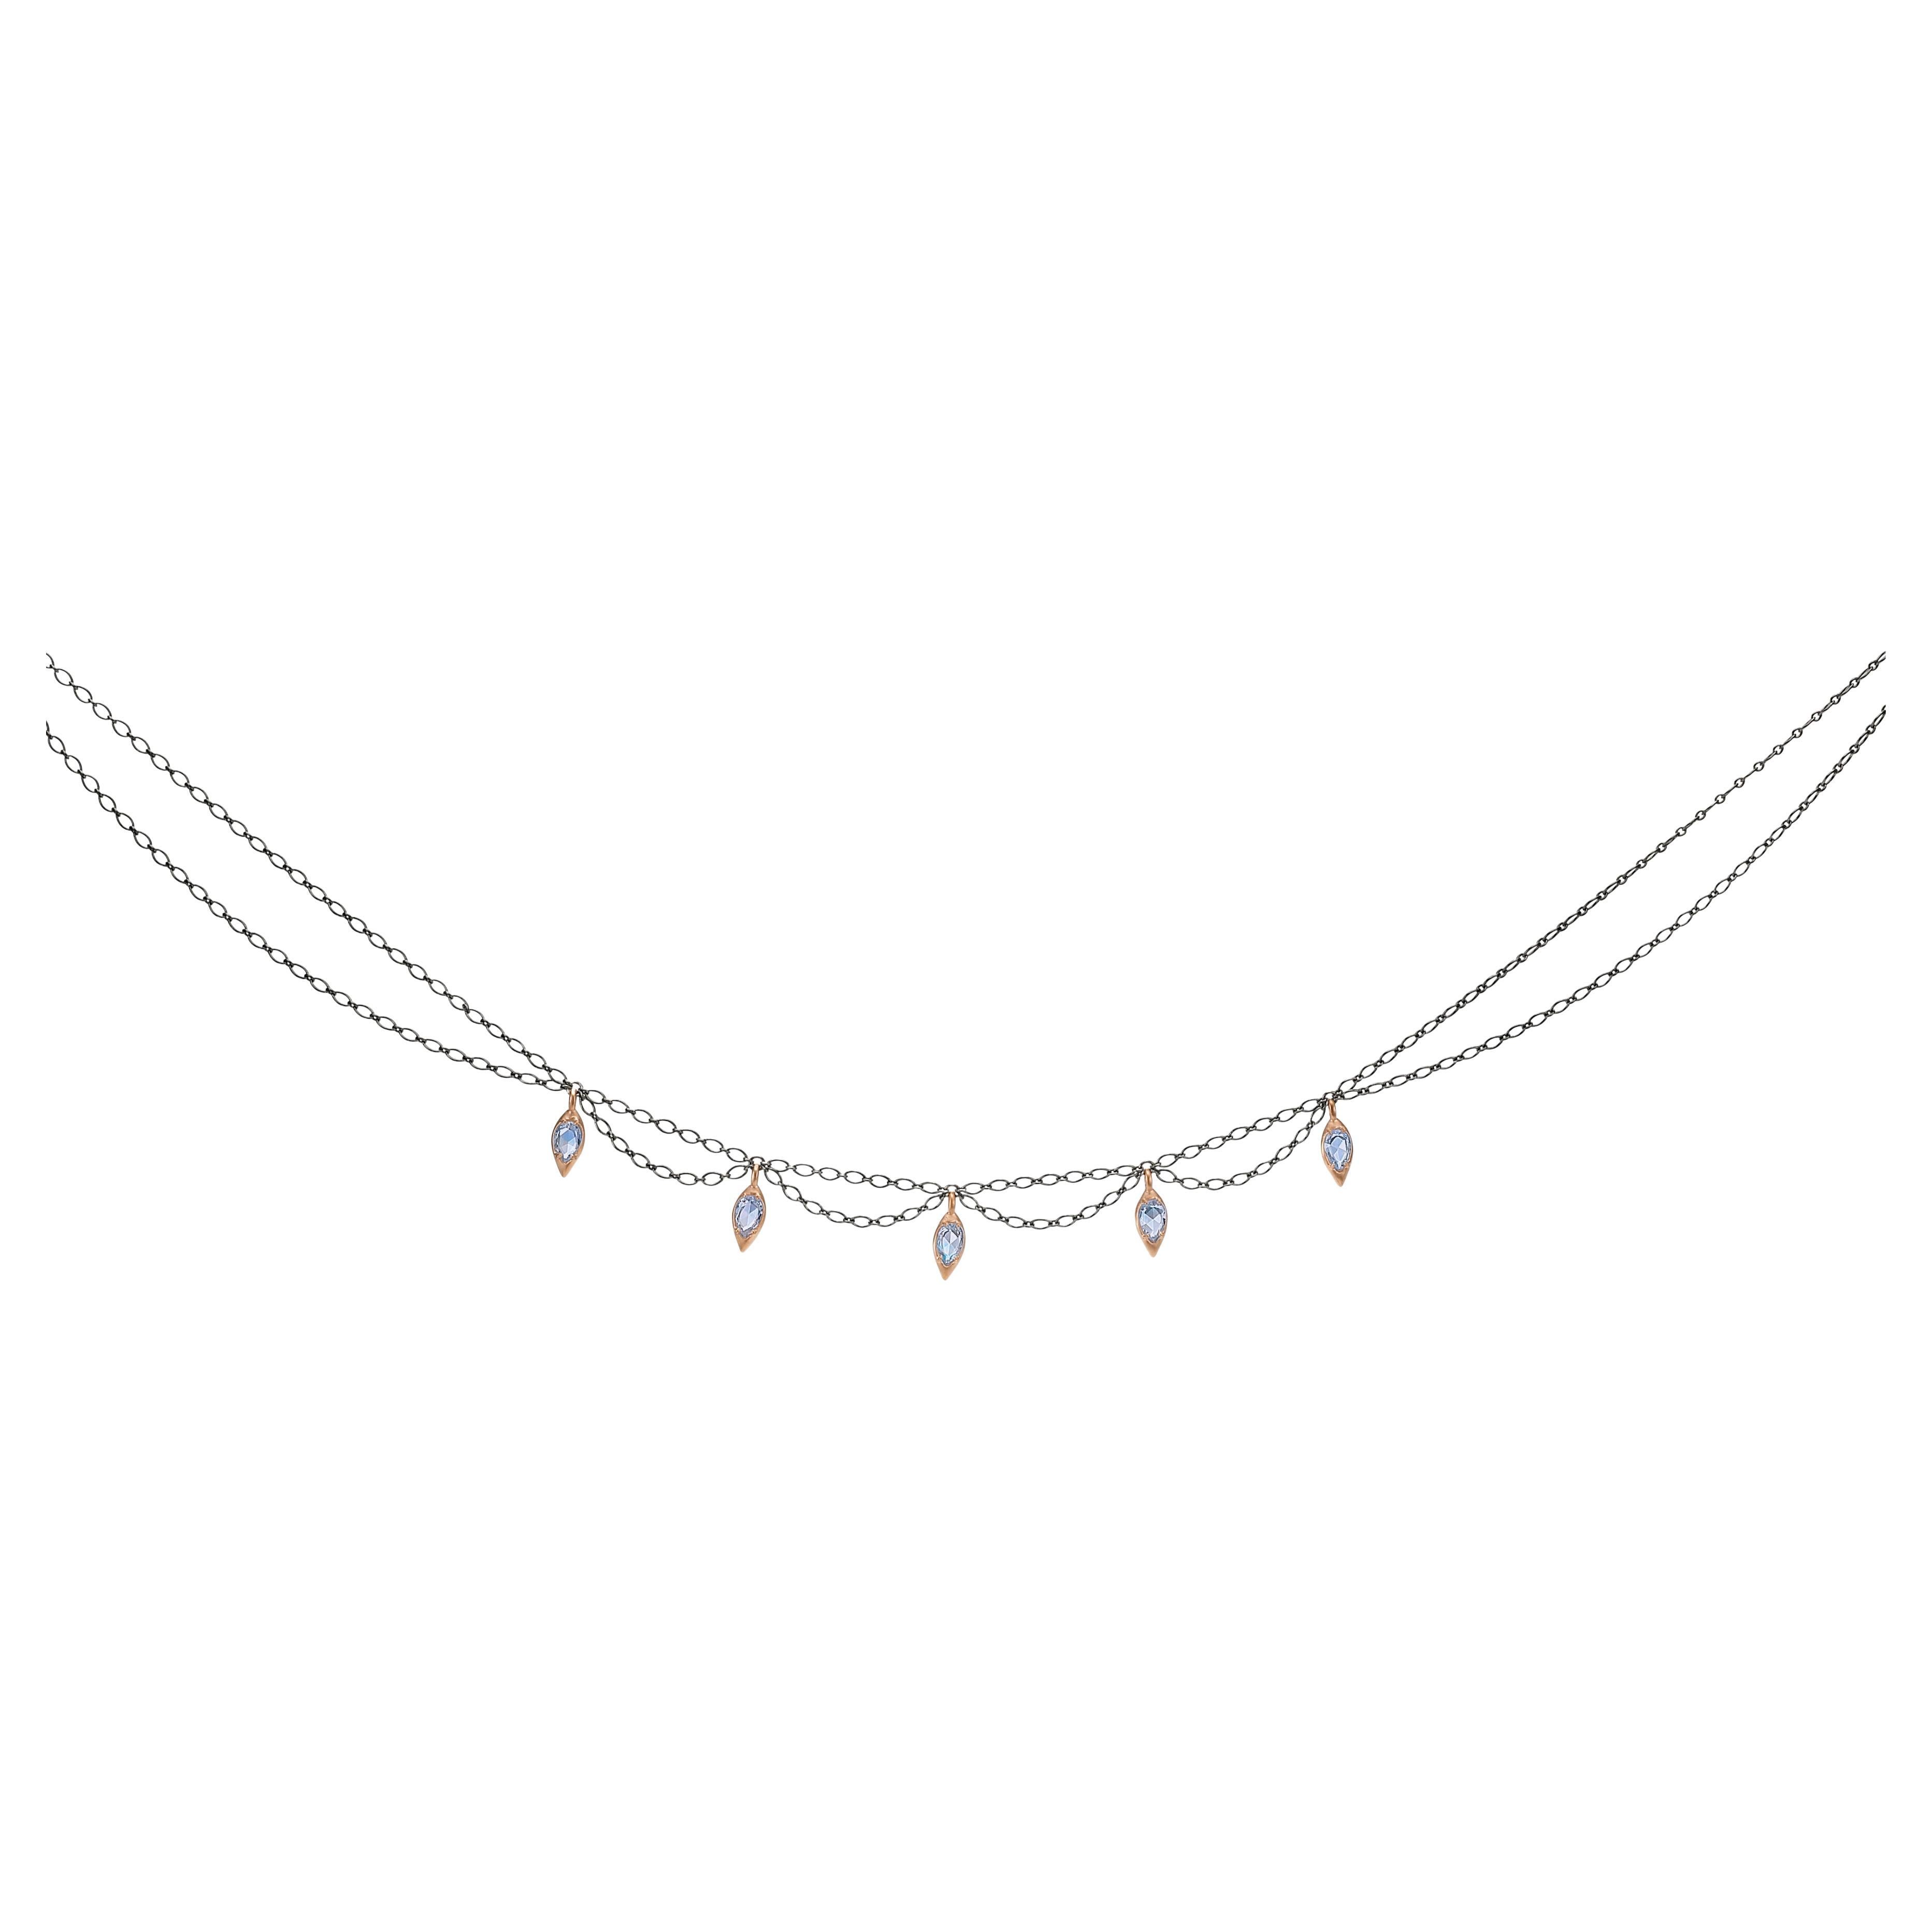 Rose Gold Drops Set with Rose Cut Moonstone and Sterling Silver Scalloped Chain For Sale 1